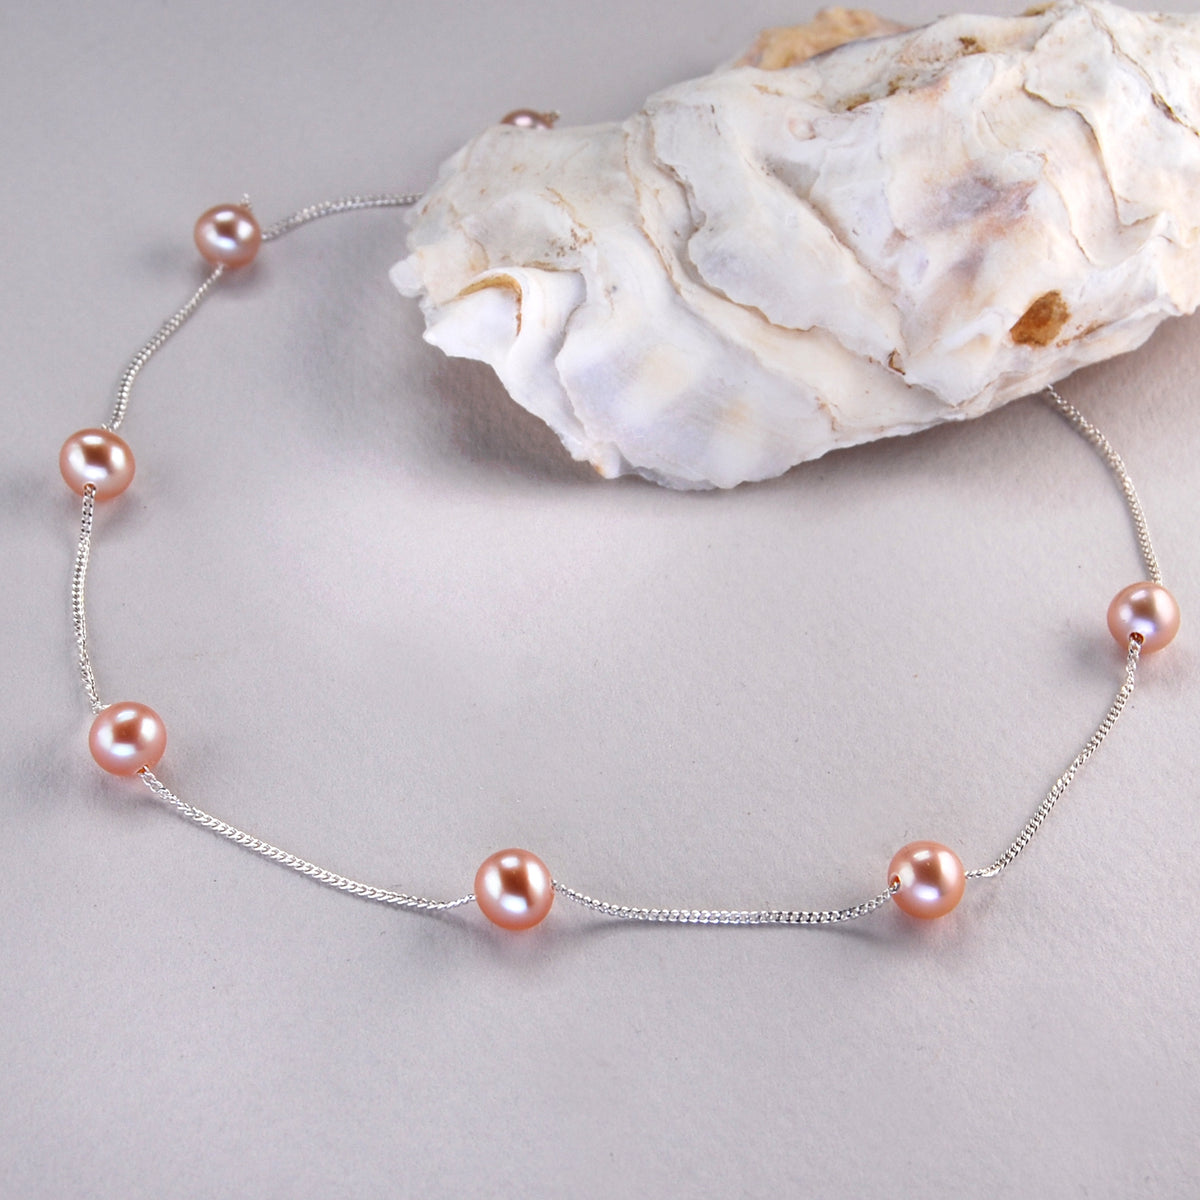 Large round Freshwater Pearl Spacer Necklace on Silver Chain in Pink